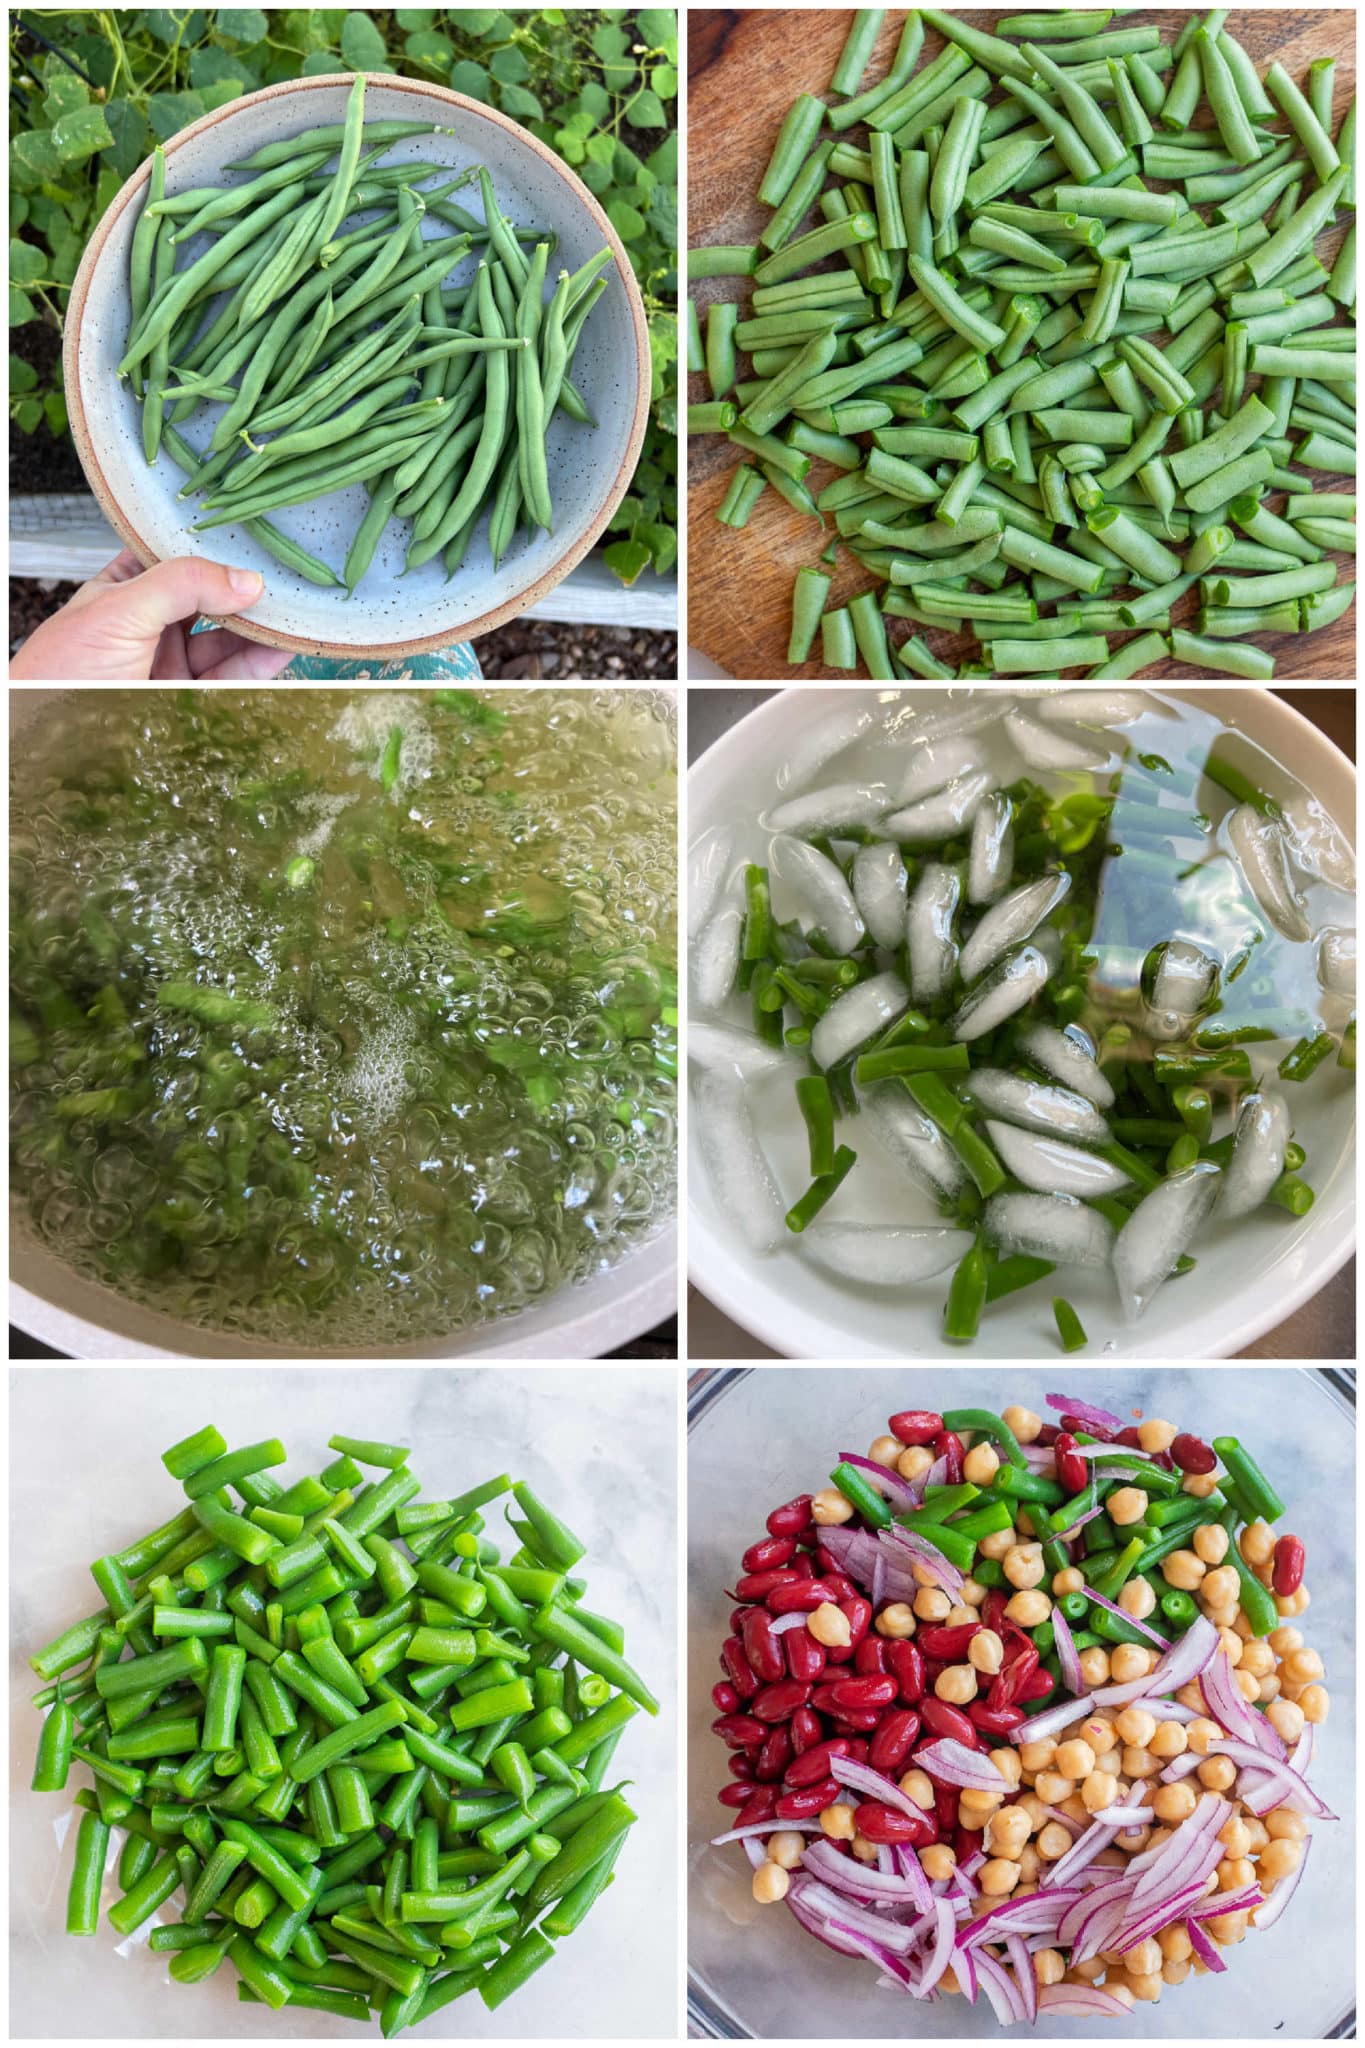 showing how to cut up and blanch green beans